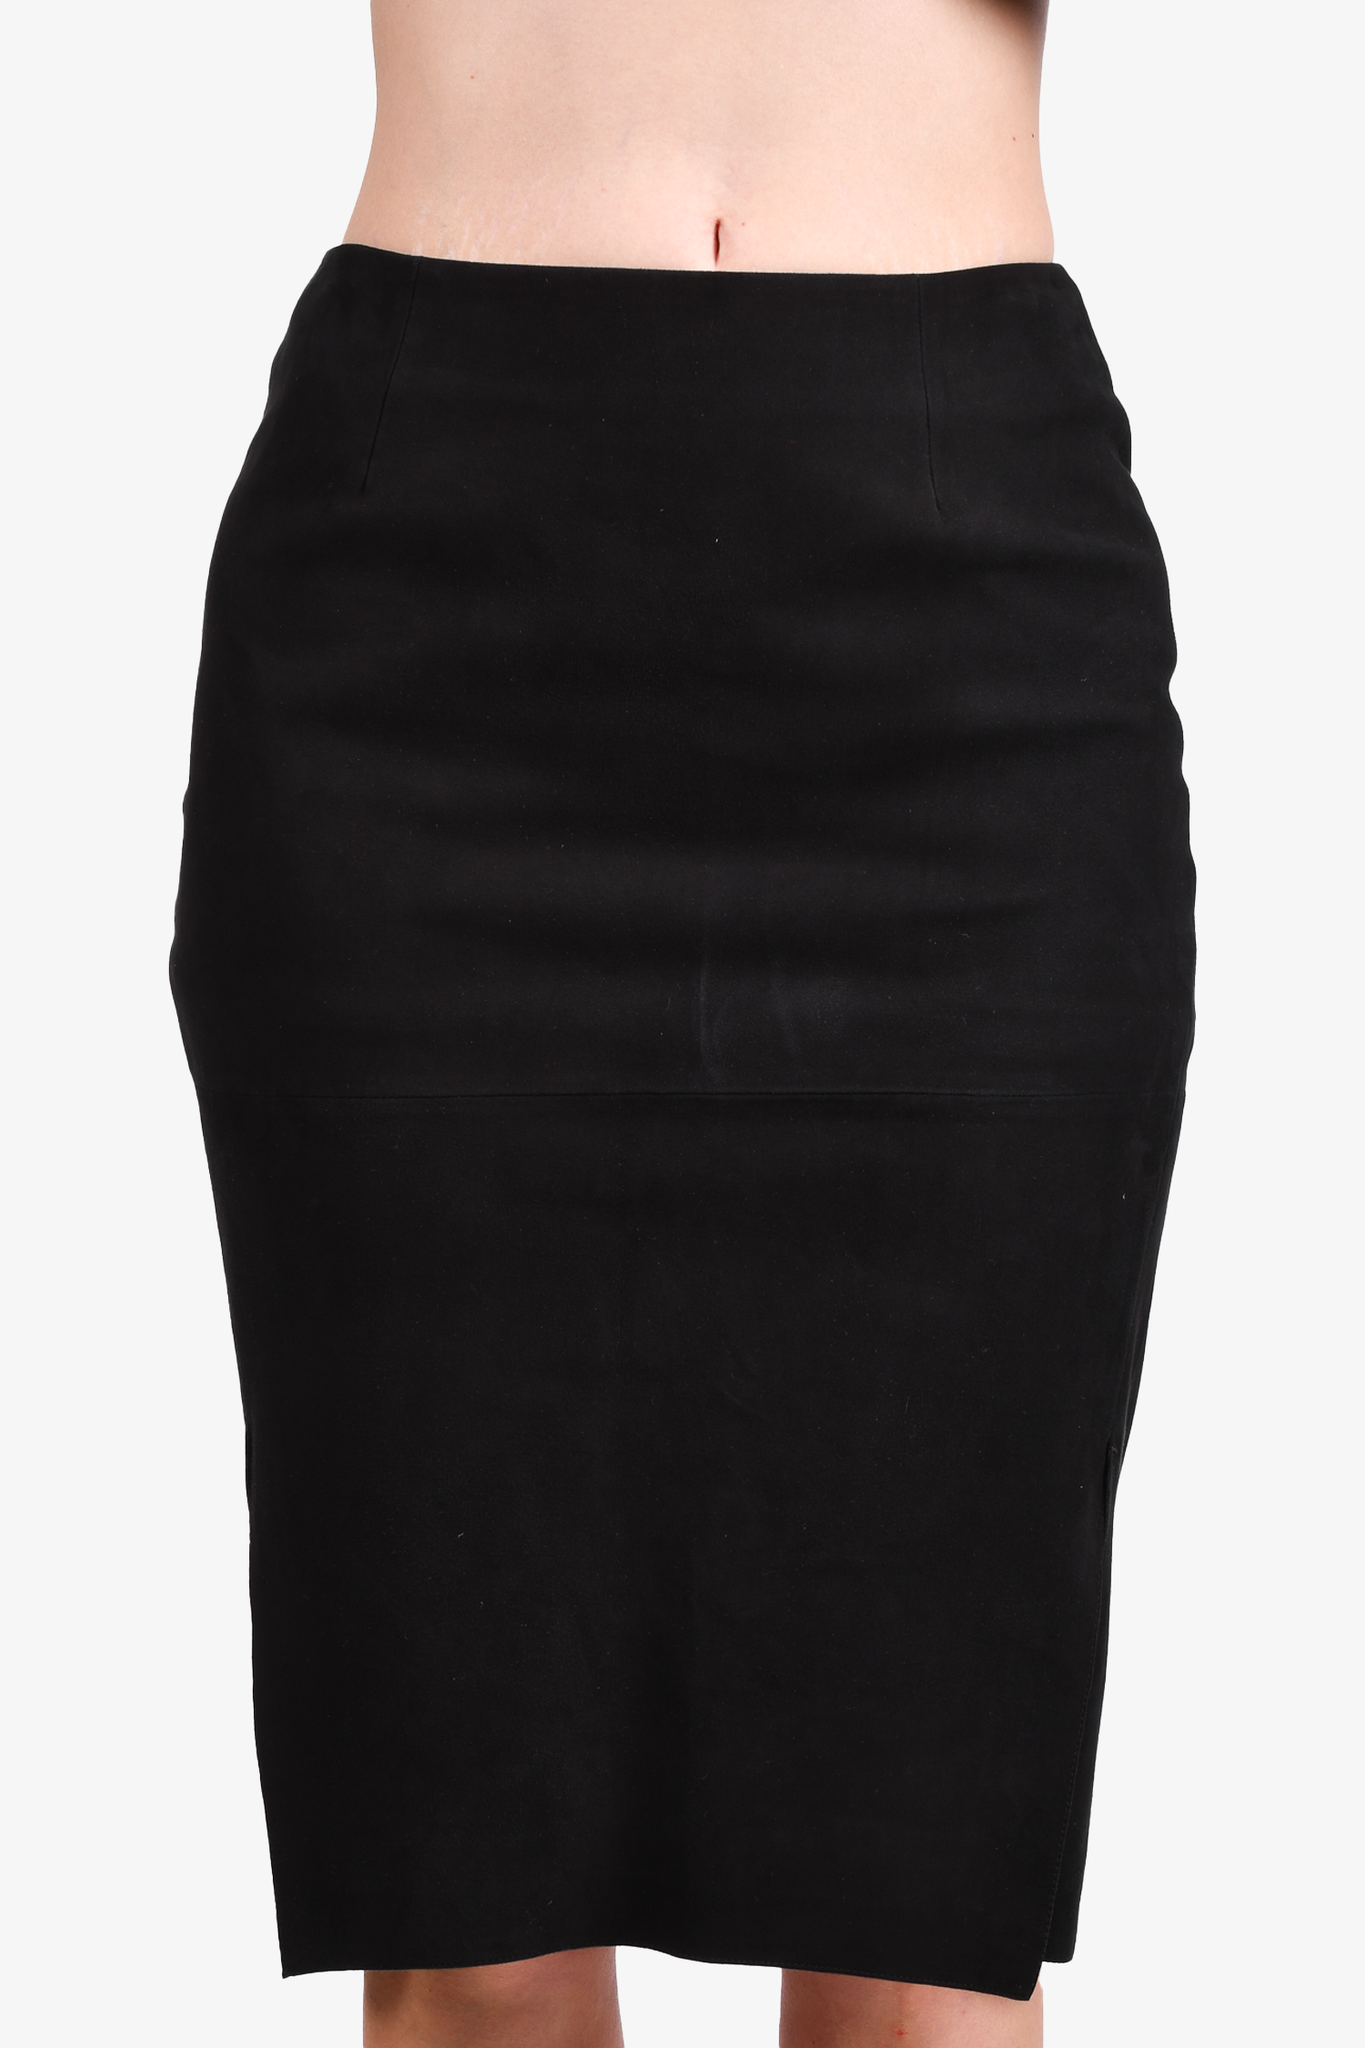 Tom Ford Black Suede Pencil Skirt with Front Slits Size 6